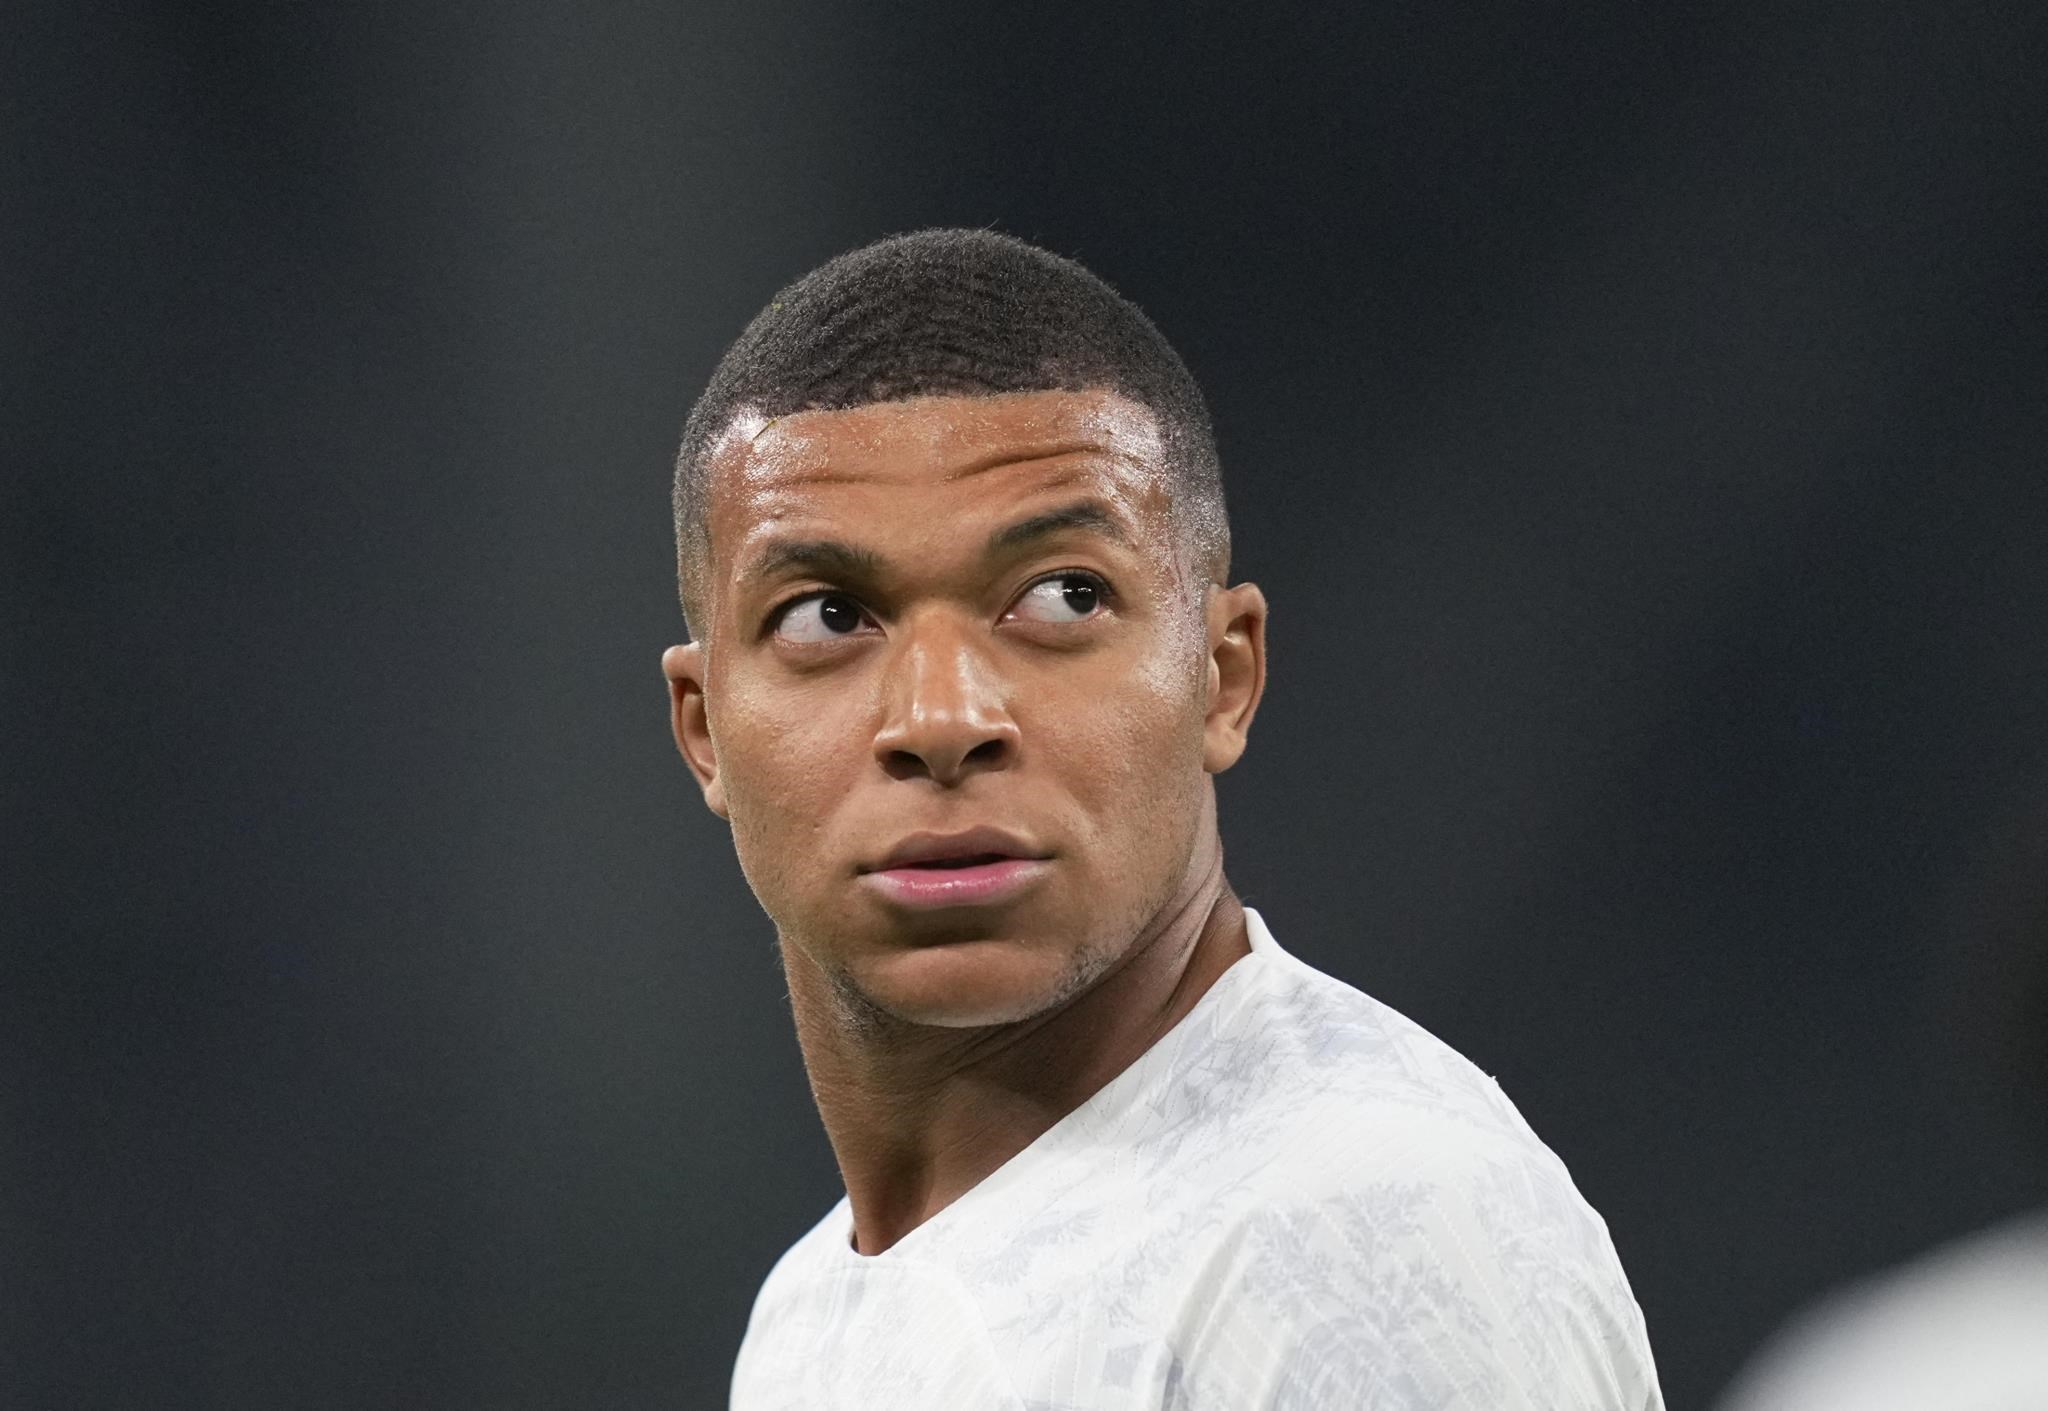 Sports: Kylian Mbappe has become the new captain of the French national team